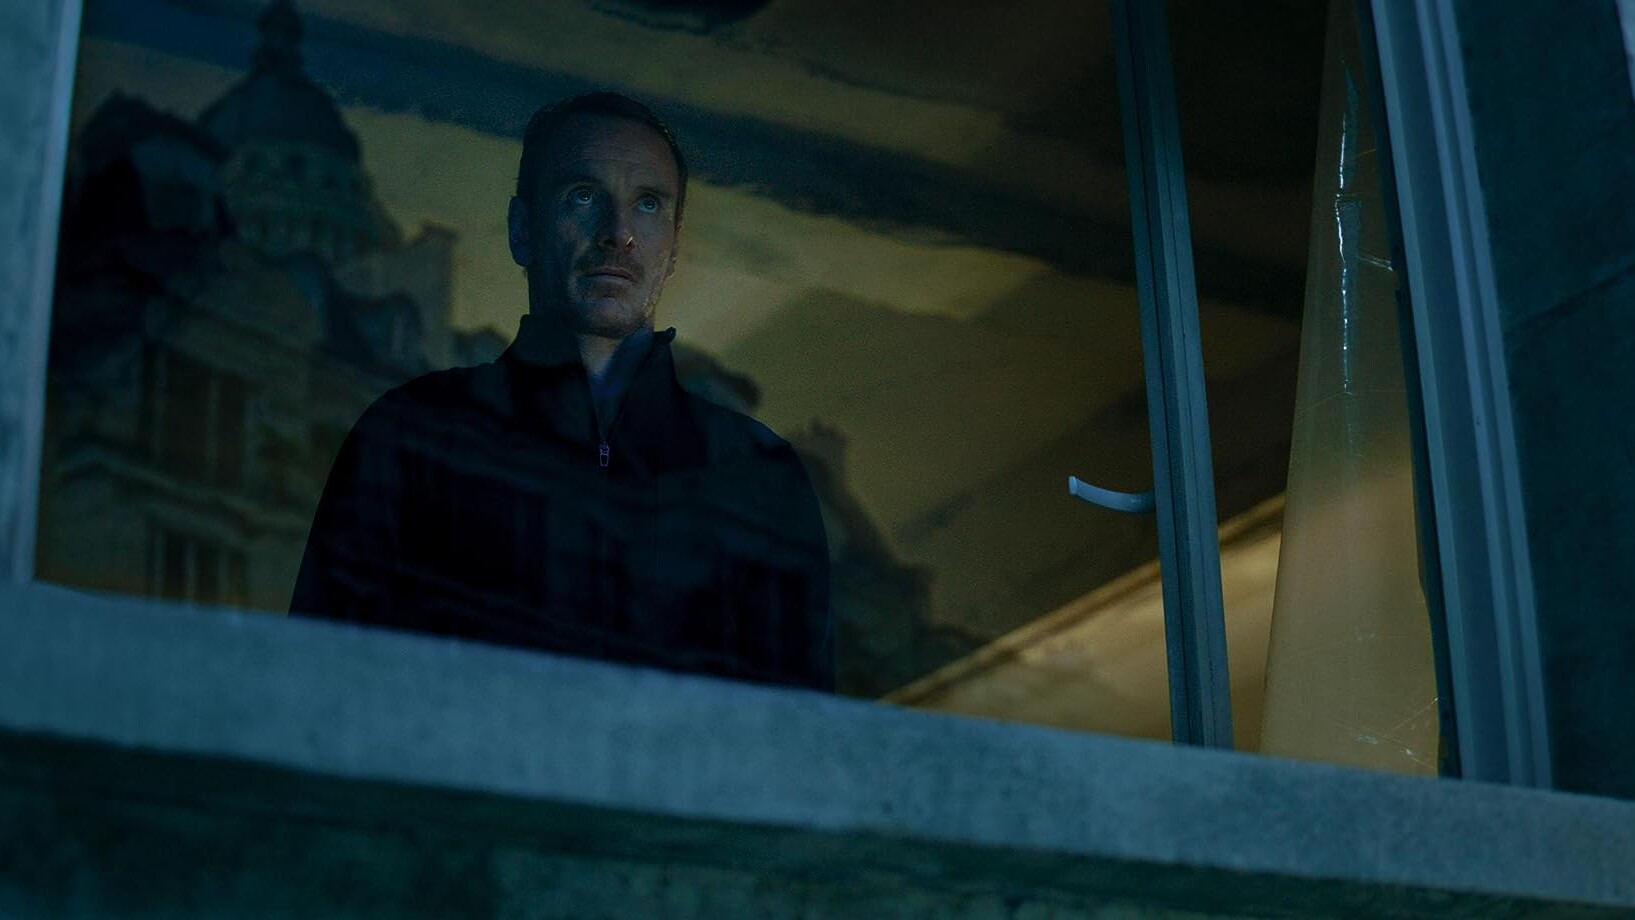 Michael Fassbender in 'The Killer,' a film by David Fincher. Photo courtesy of Netflix